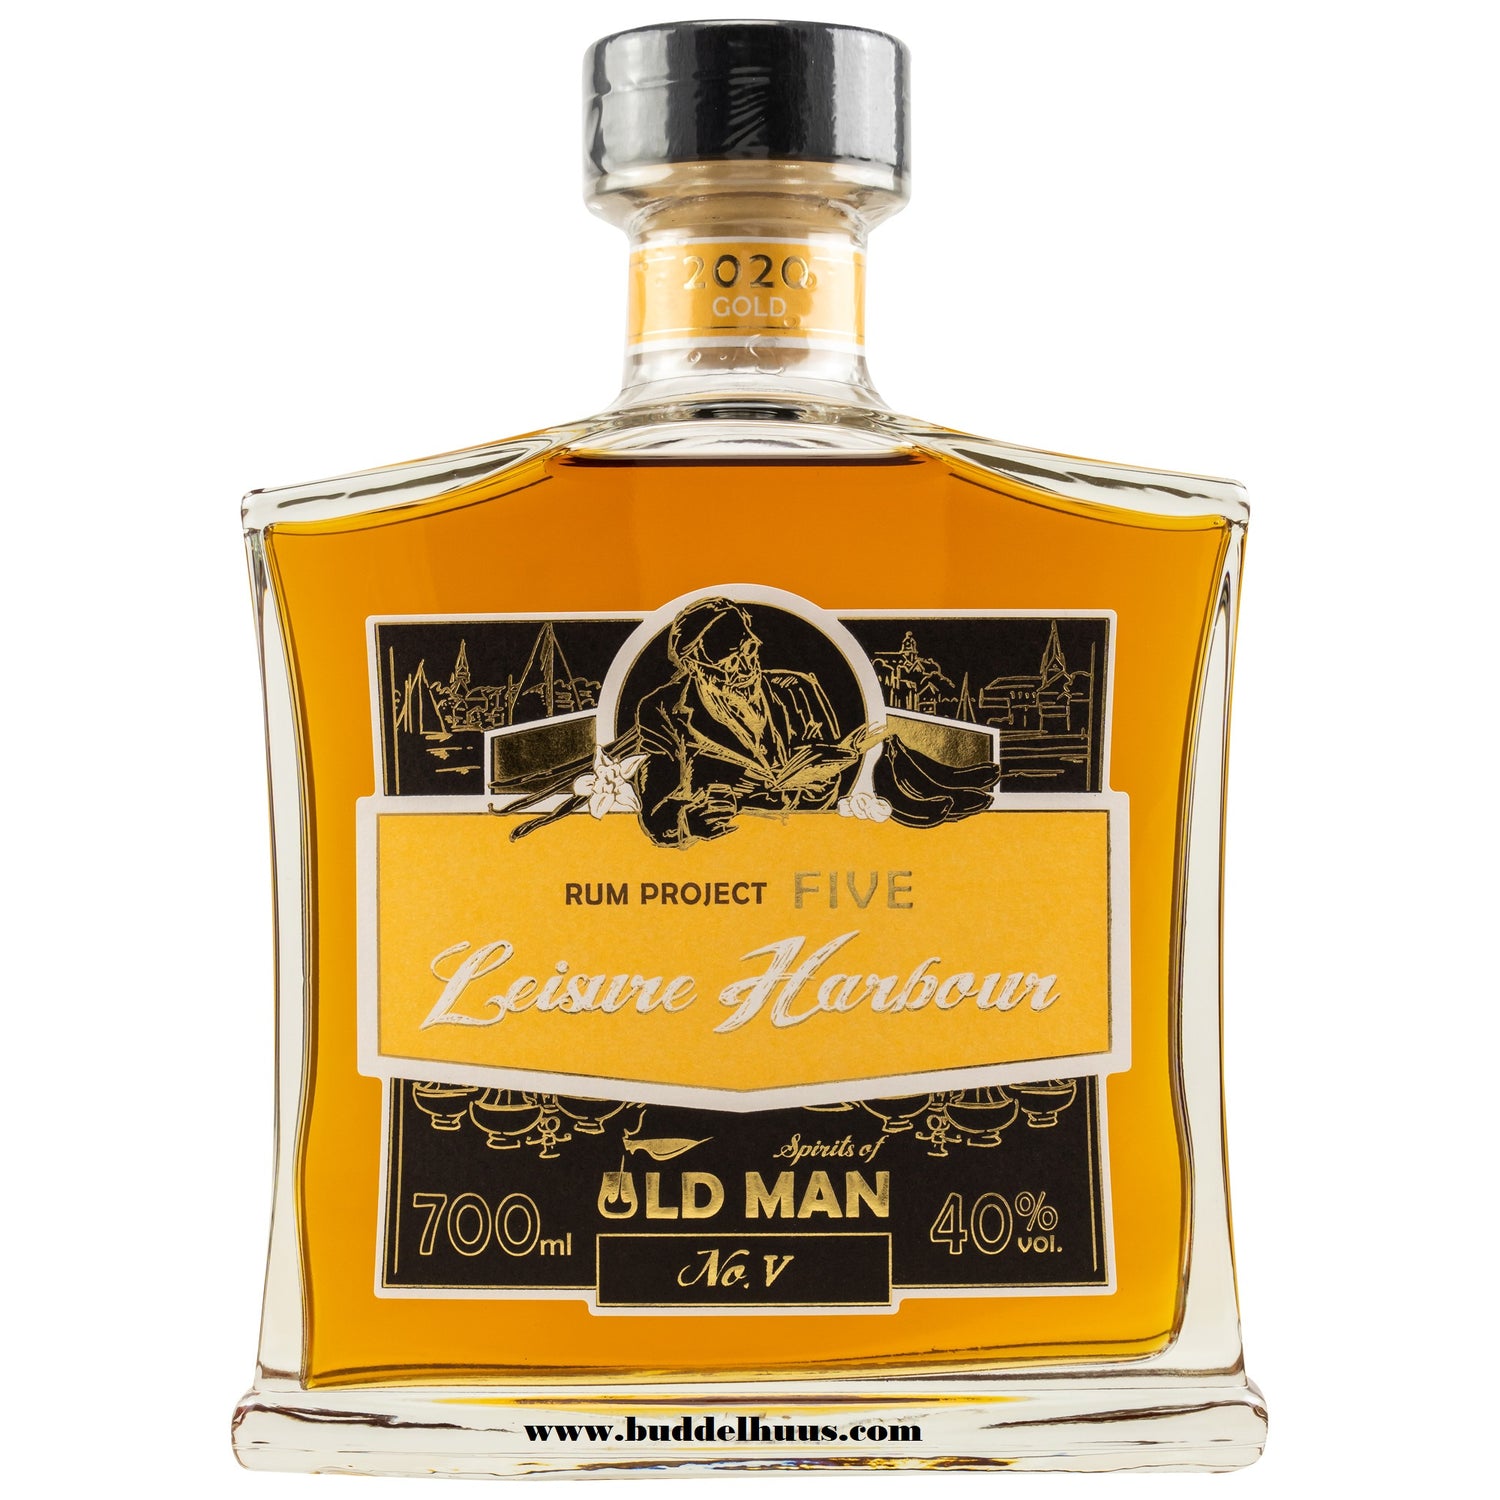 Spirits of Old Man Rum Project Five - Leisure Harbour